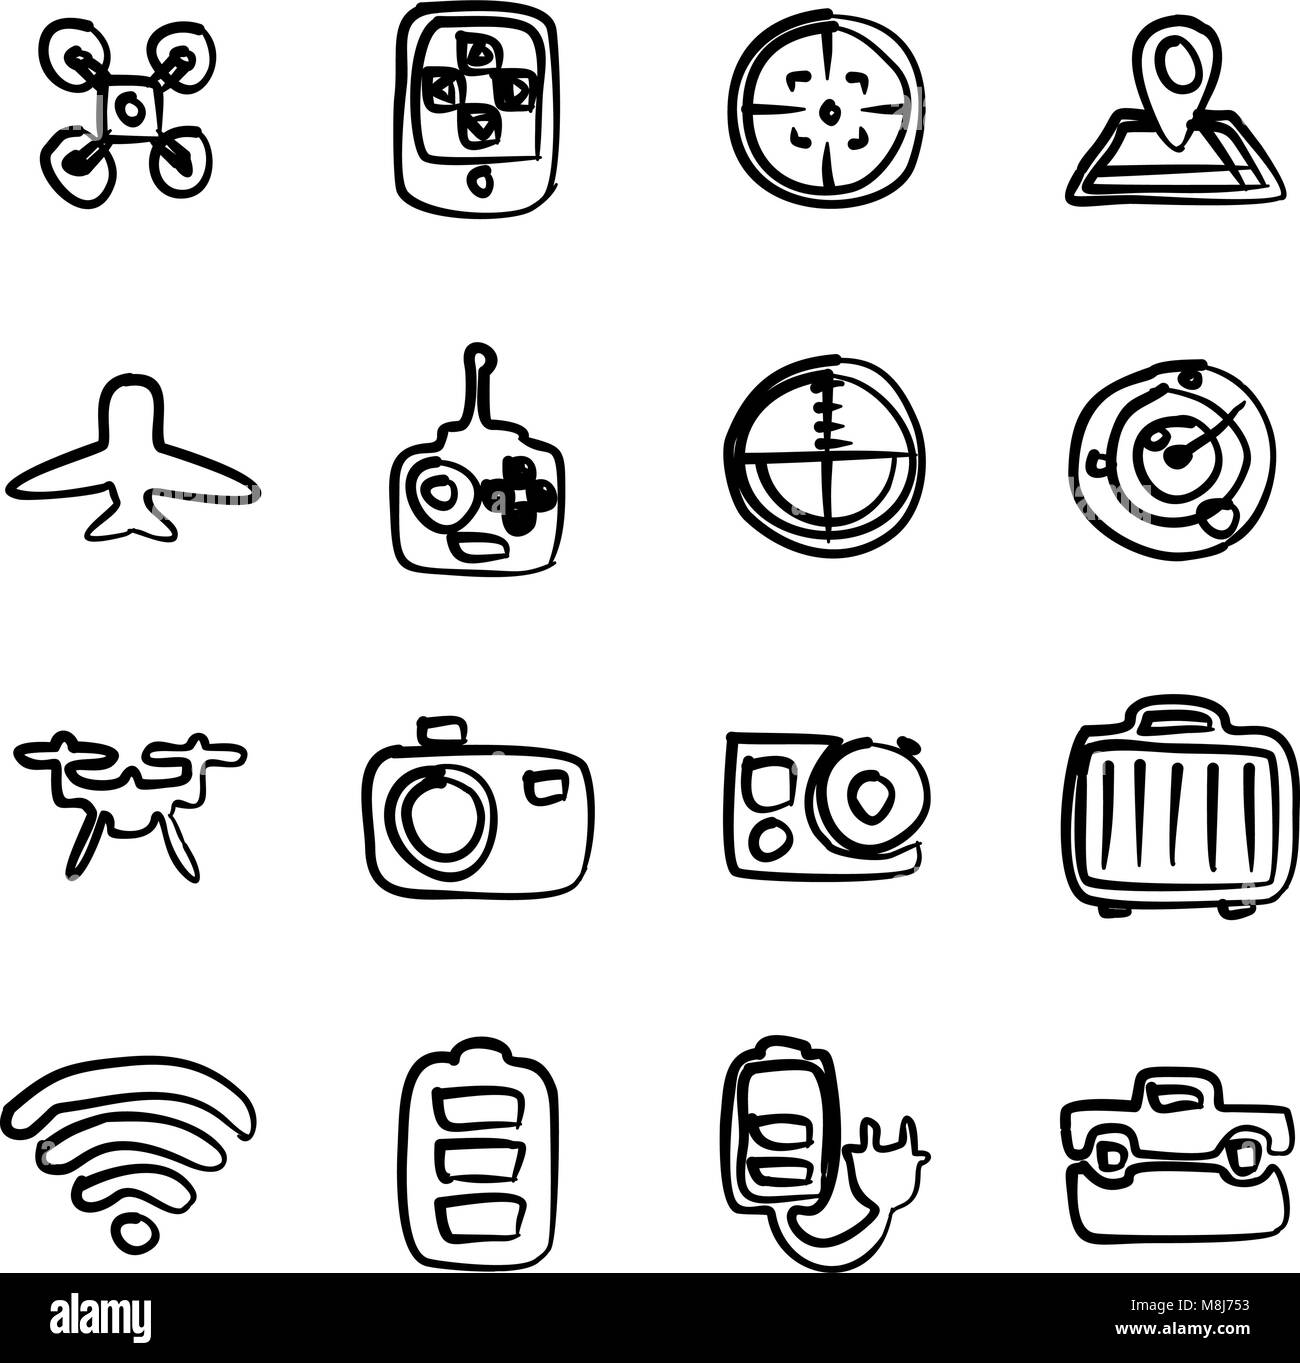 Drone Or Quadcopter Icons Freehand Stock Vector